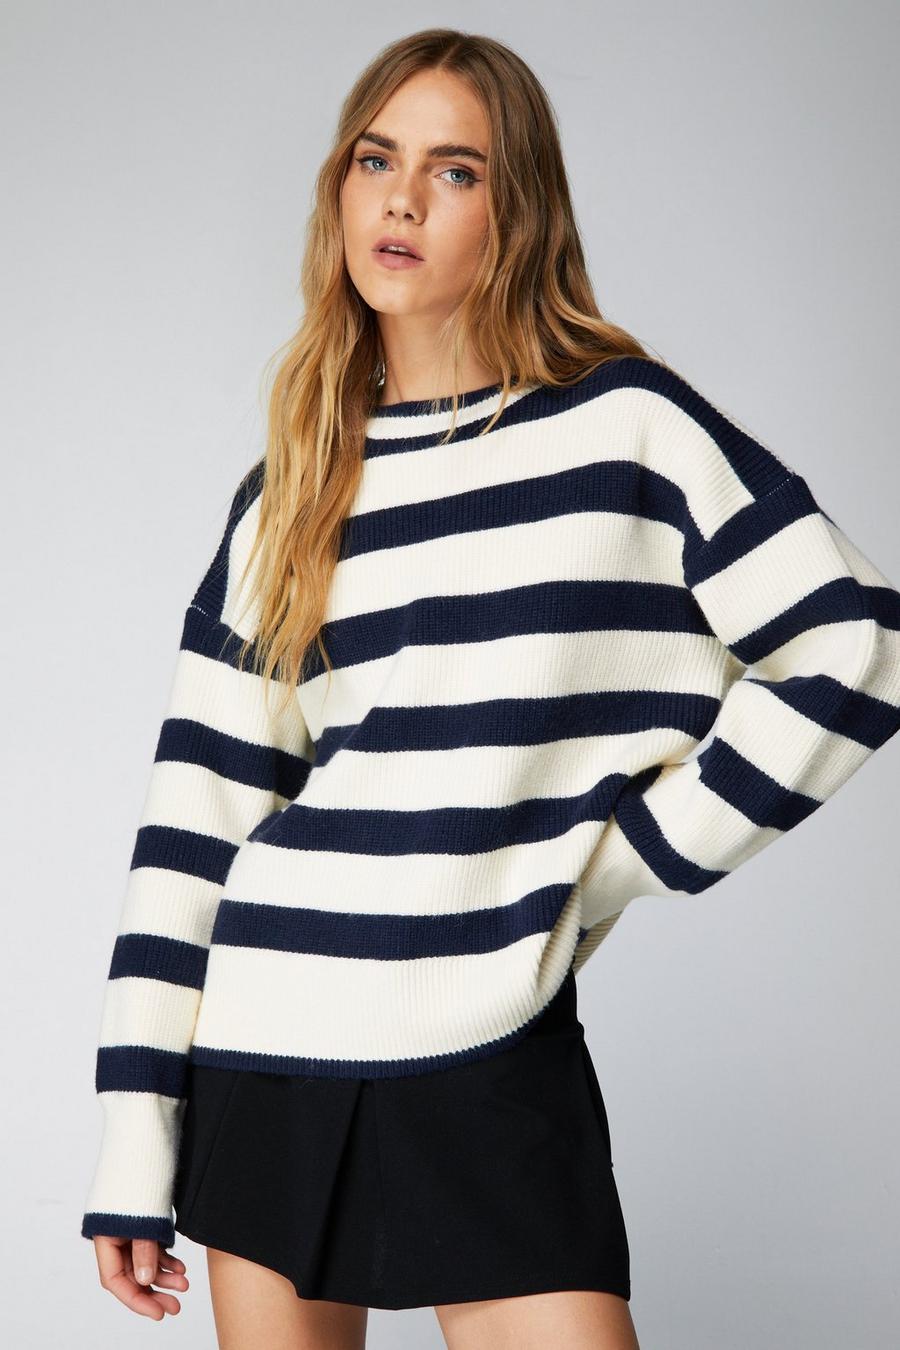 Women's Sweaters | Knit Jumpers & Sweater | Nasty Gal